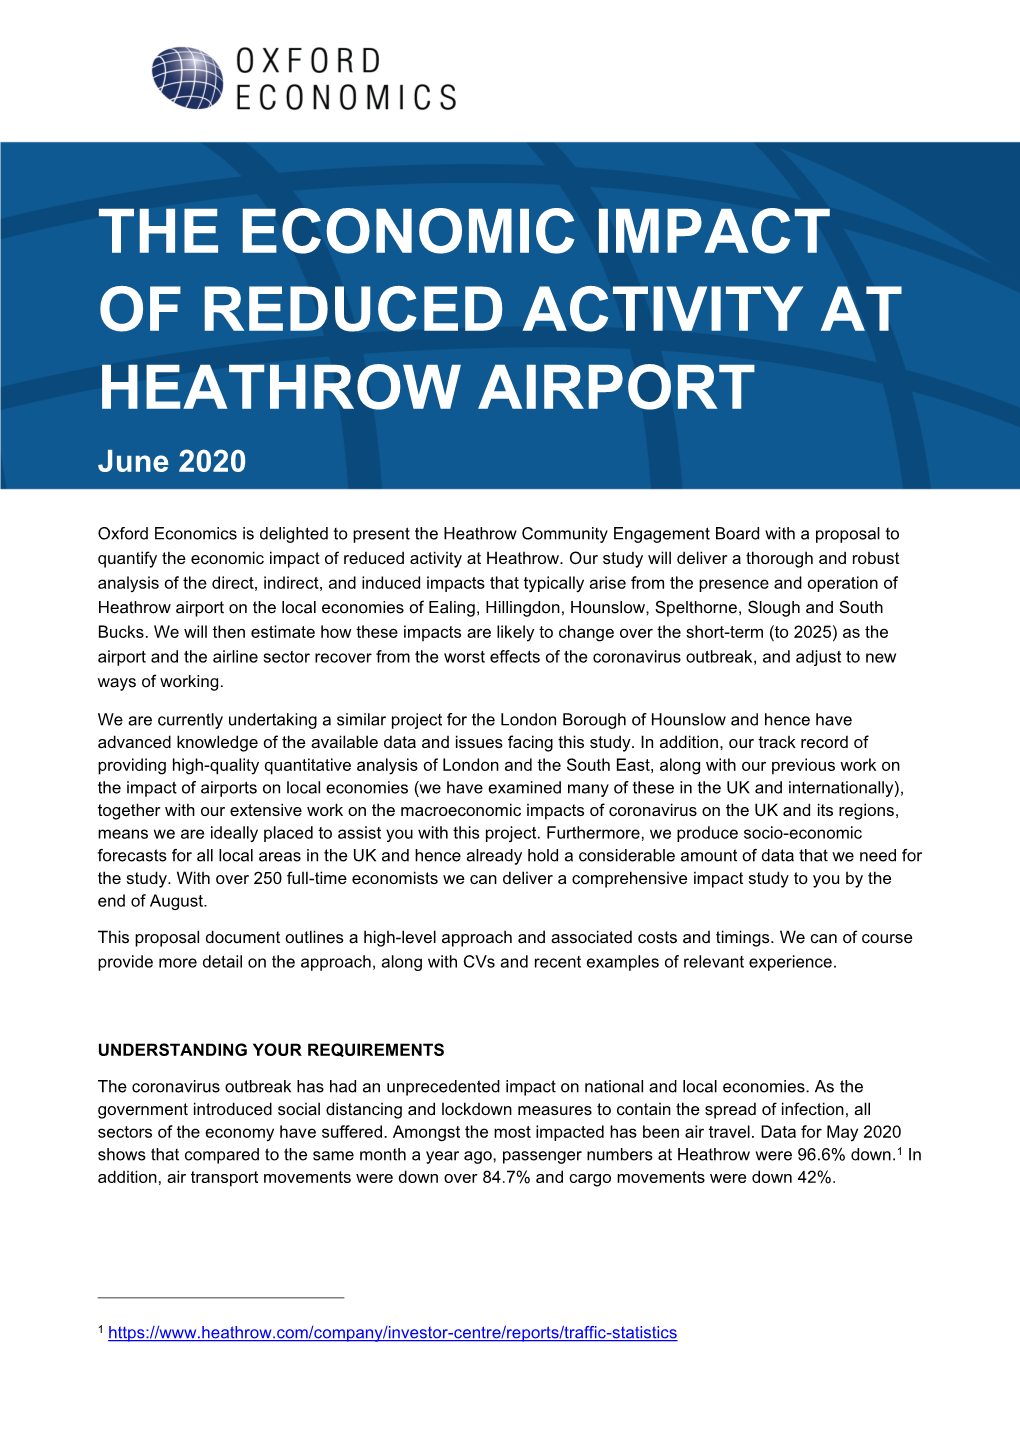 THE ECONOMIC IMPACT of REDUCED ACTIVITY at HEATHROW AIRPORT June 2020